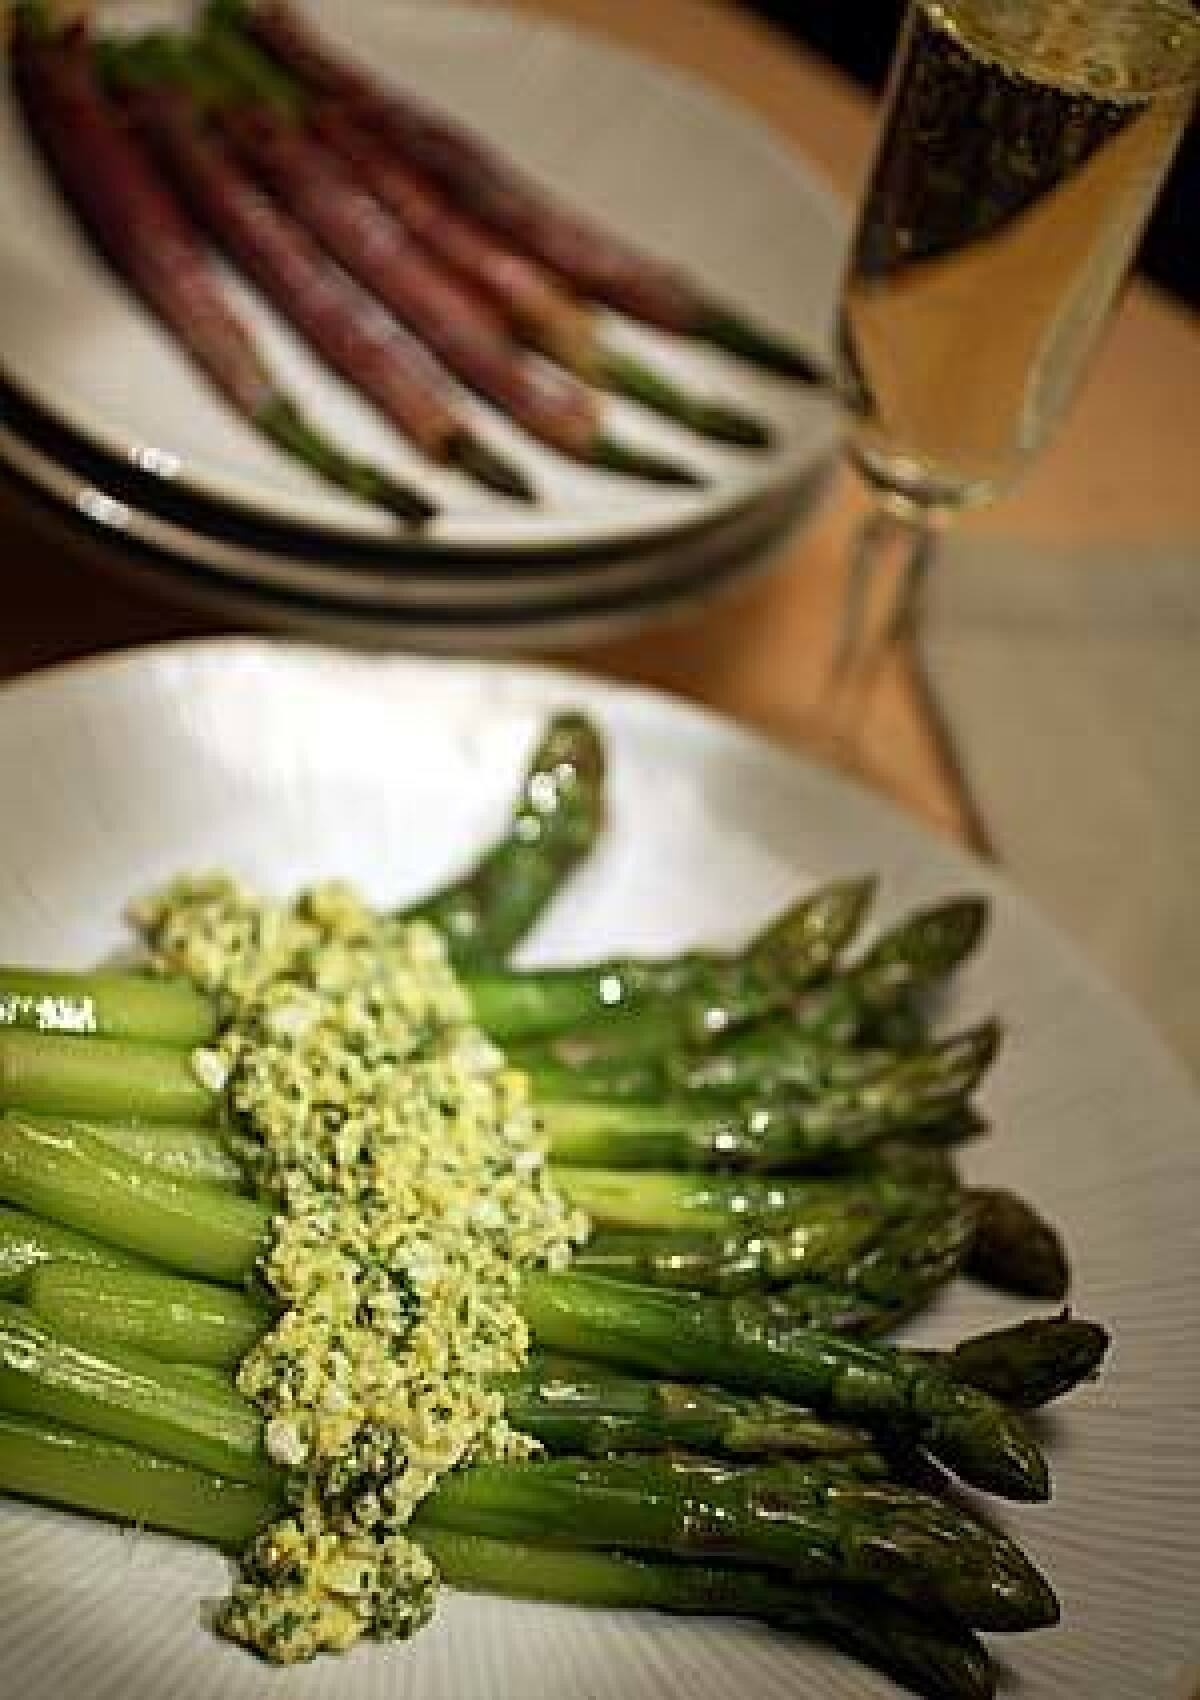 LUSCIOUS: Thick asparagus are served with sauce mimosa, a vinaigrette enriched with hard-boiled eggs. In the background, medium spears are wrapped in prosciutto and roasted.